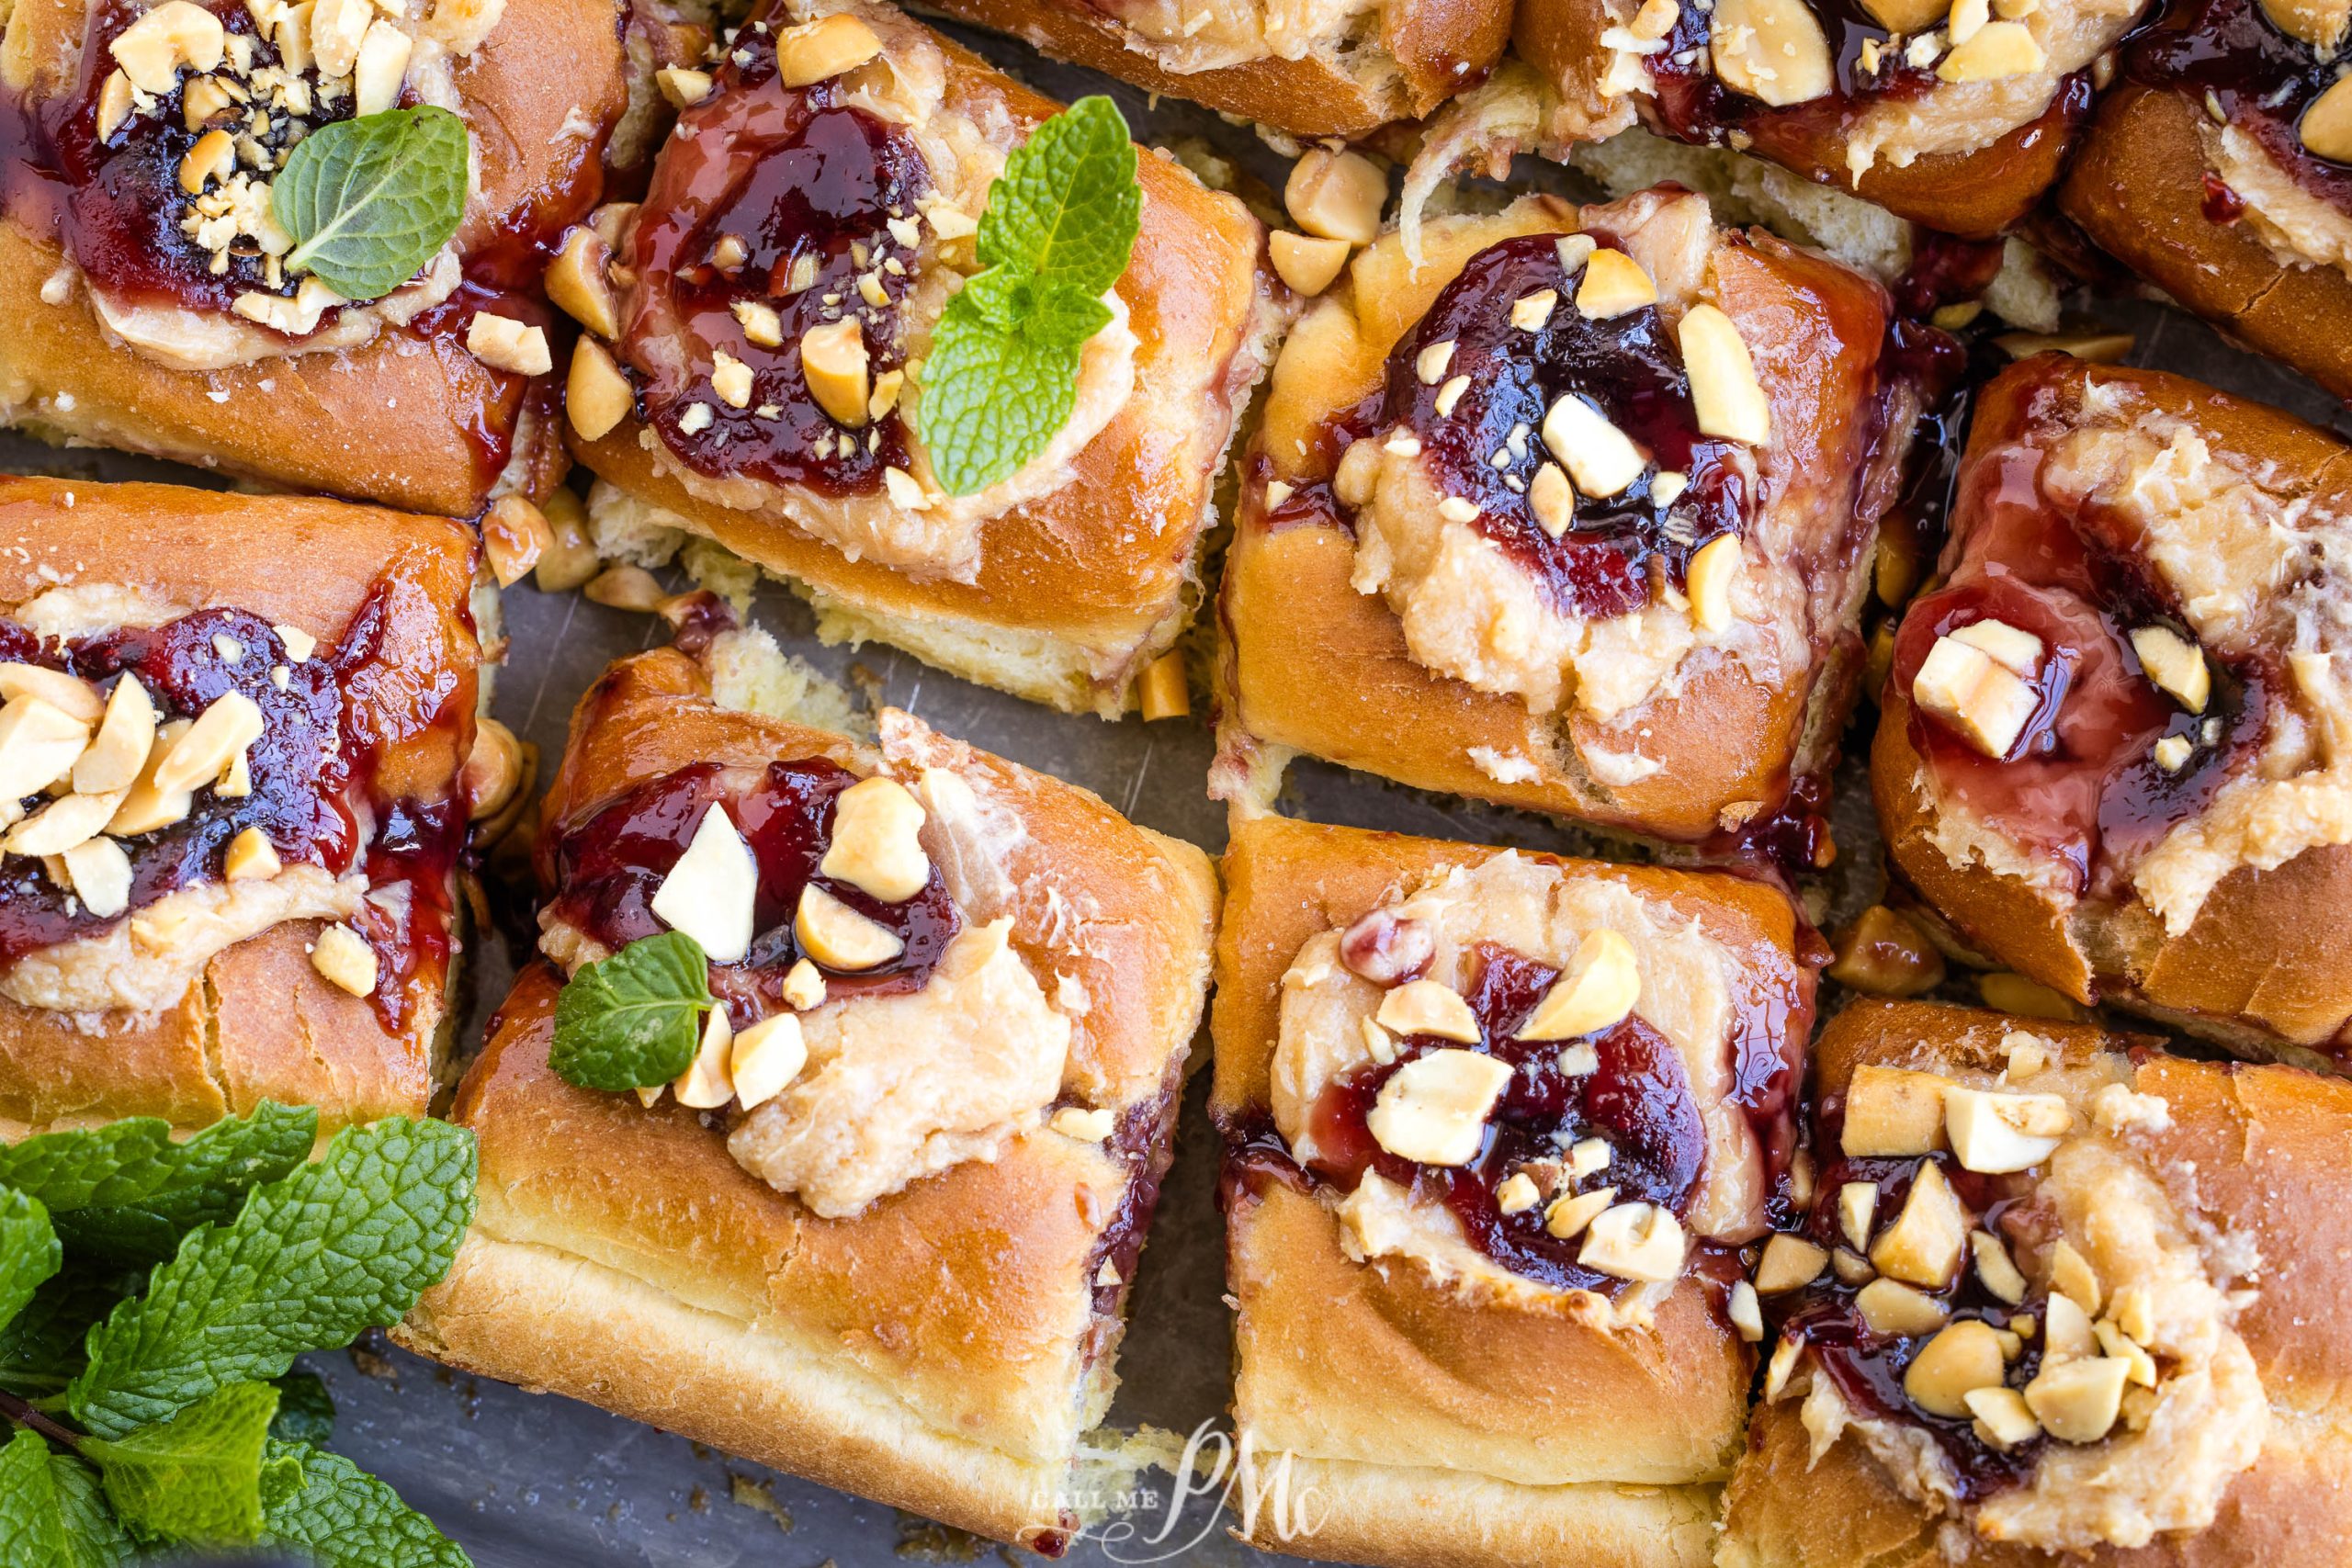 Freshly baked rolls topped with fruit jam and chopped nuts.